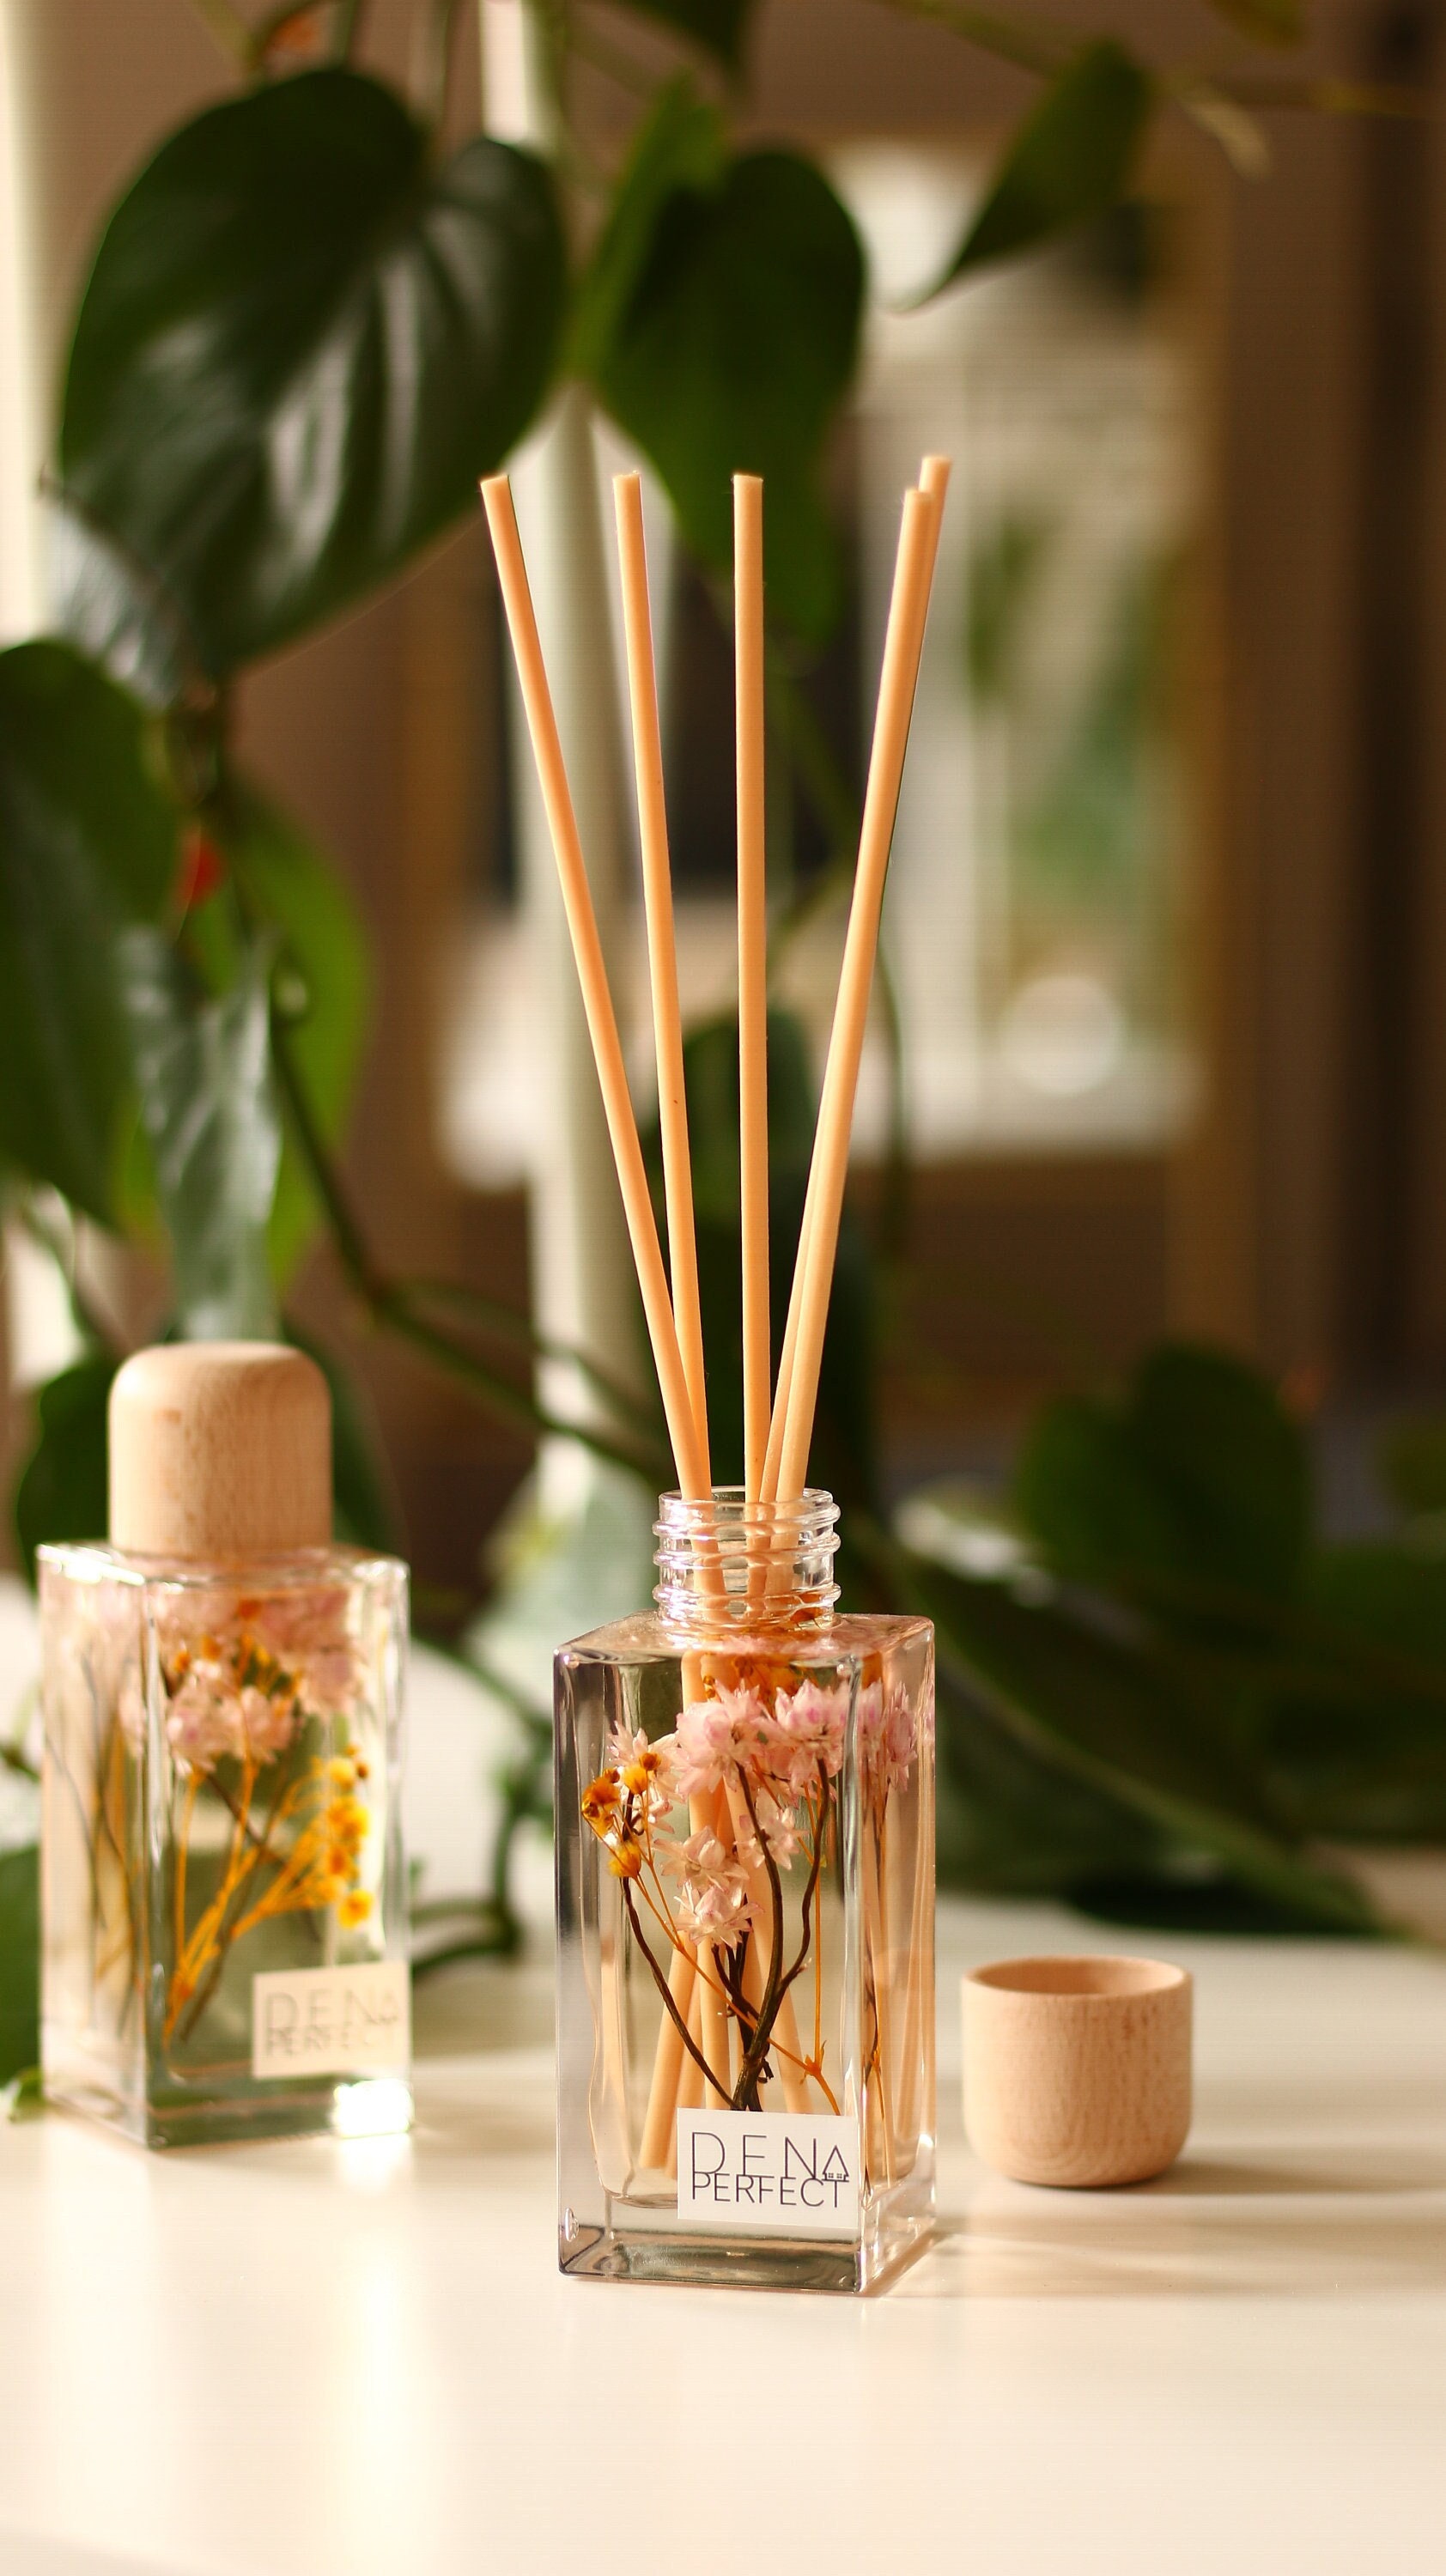 Essential Oil Diffuser, Floral Reed Diffuser With Essential Oils